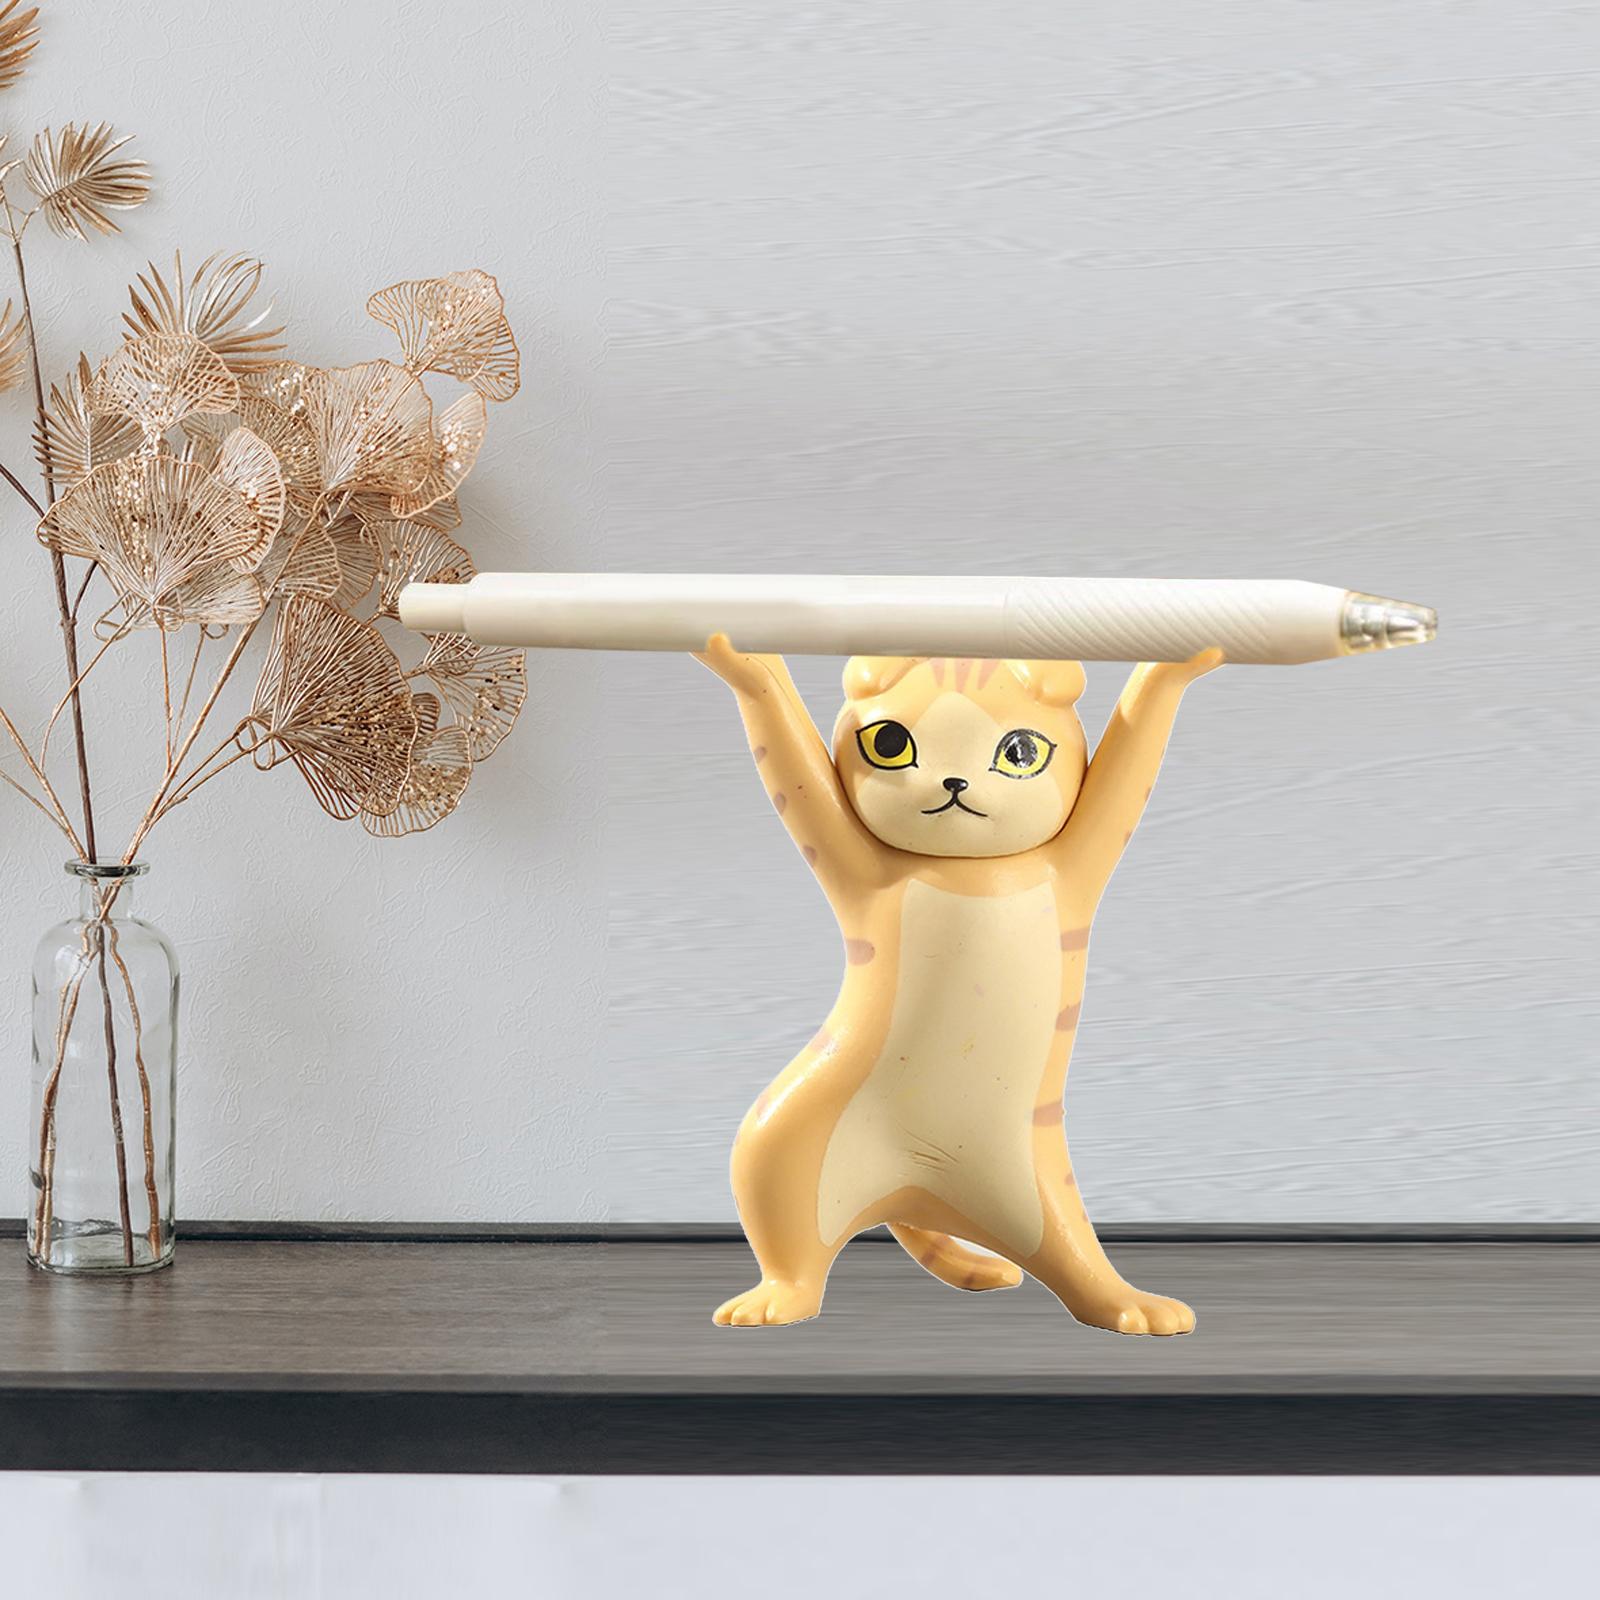 Dancing Cute Cats Dance Figure Action Toys Tabletop Sculpture Decoration Yellow